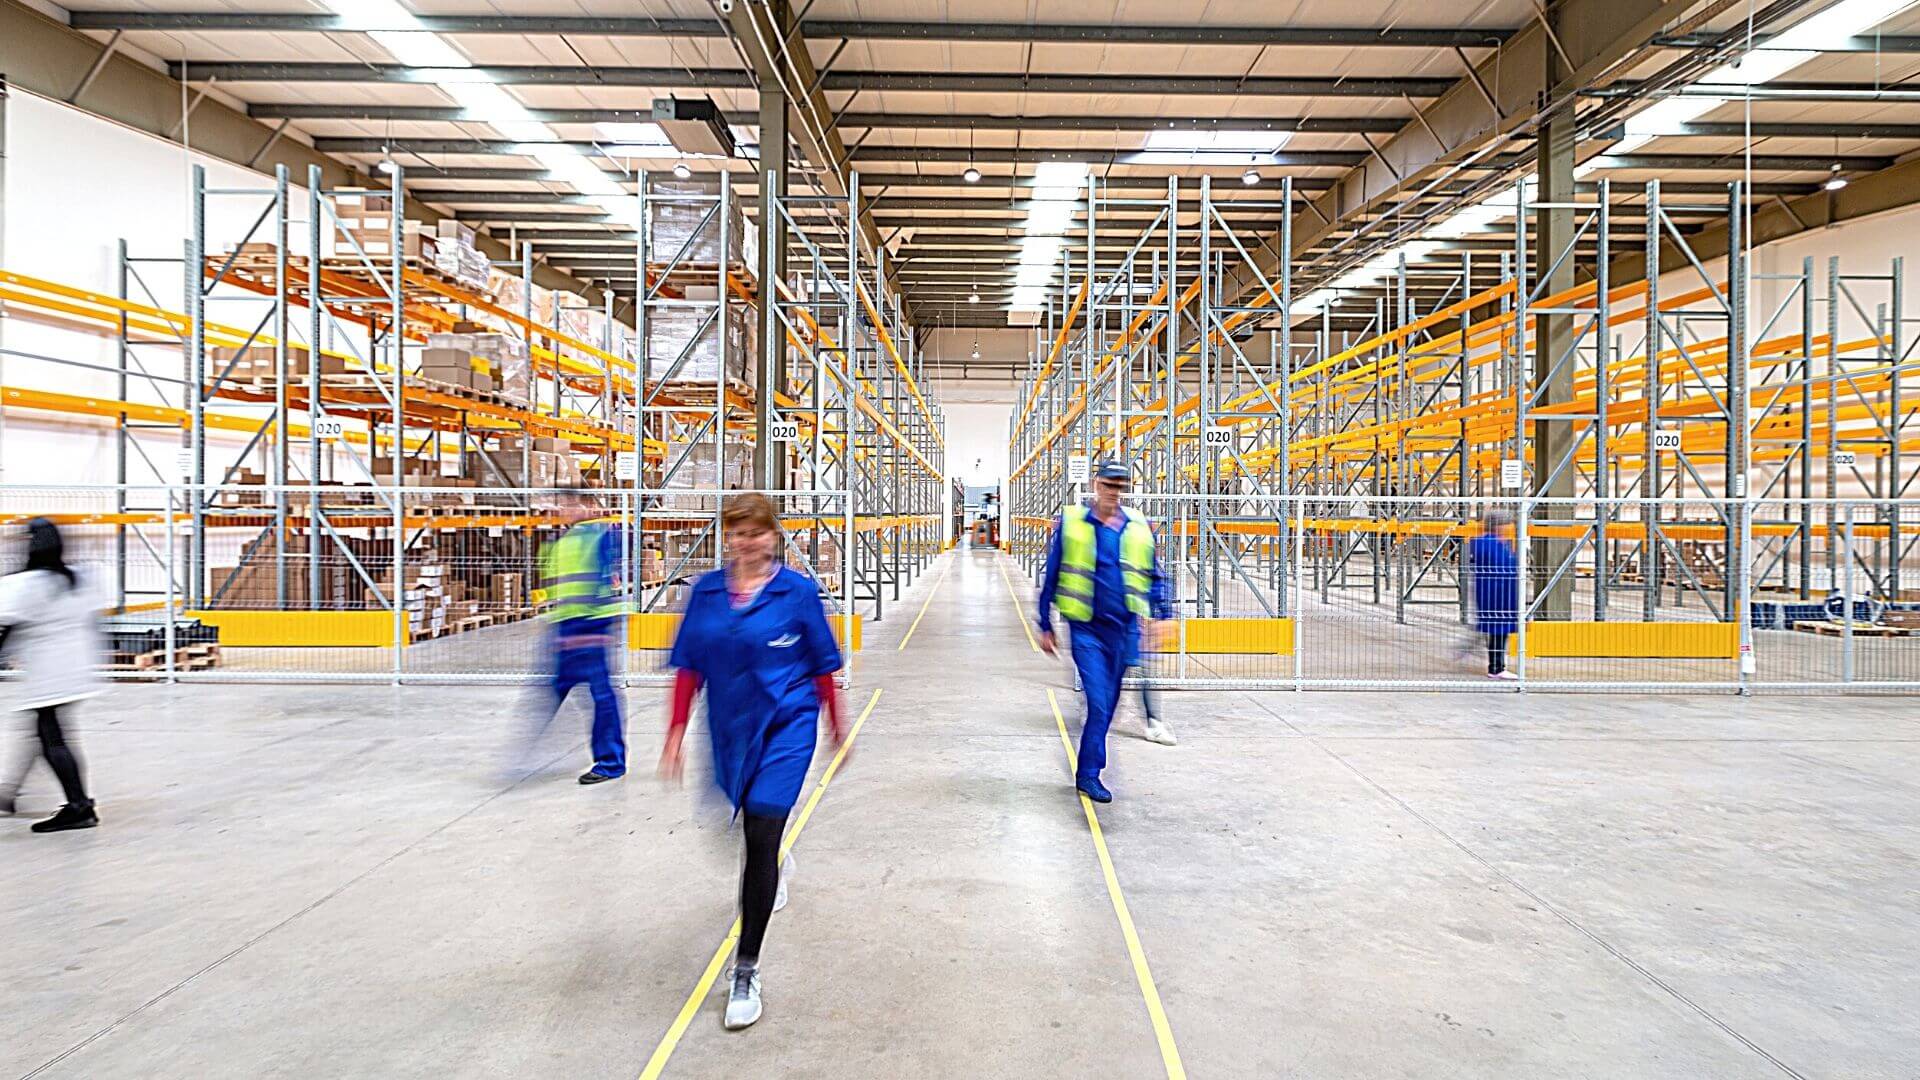 Multiple warehouse workers in blue with yellow caution vests walking through an empty warehouse. wellness programs improve employee retention